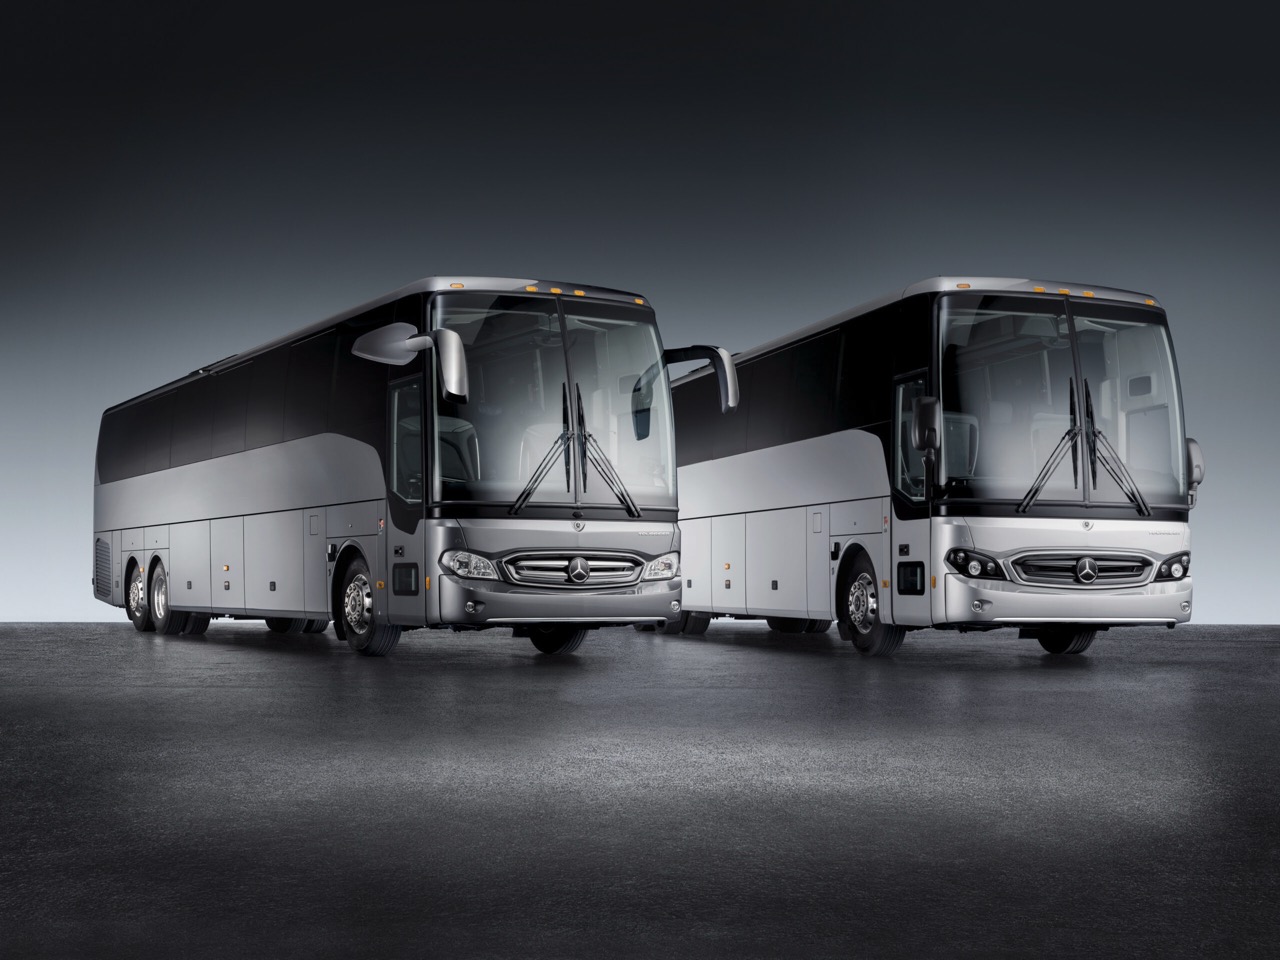 The Benefits of Choosing Coach Hire for Your Next UK Corporate Event